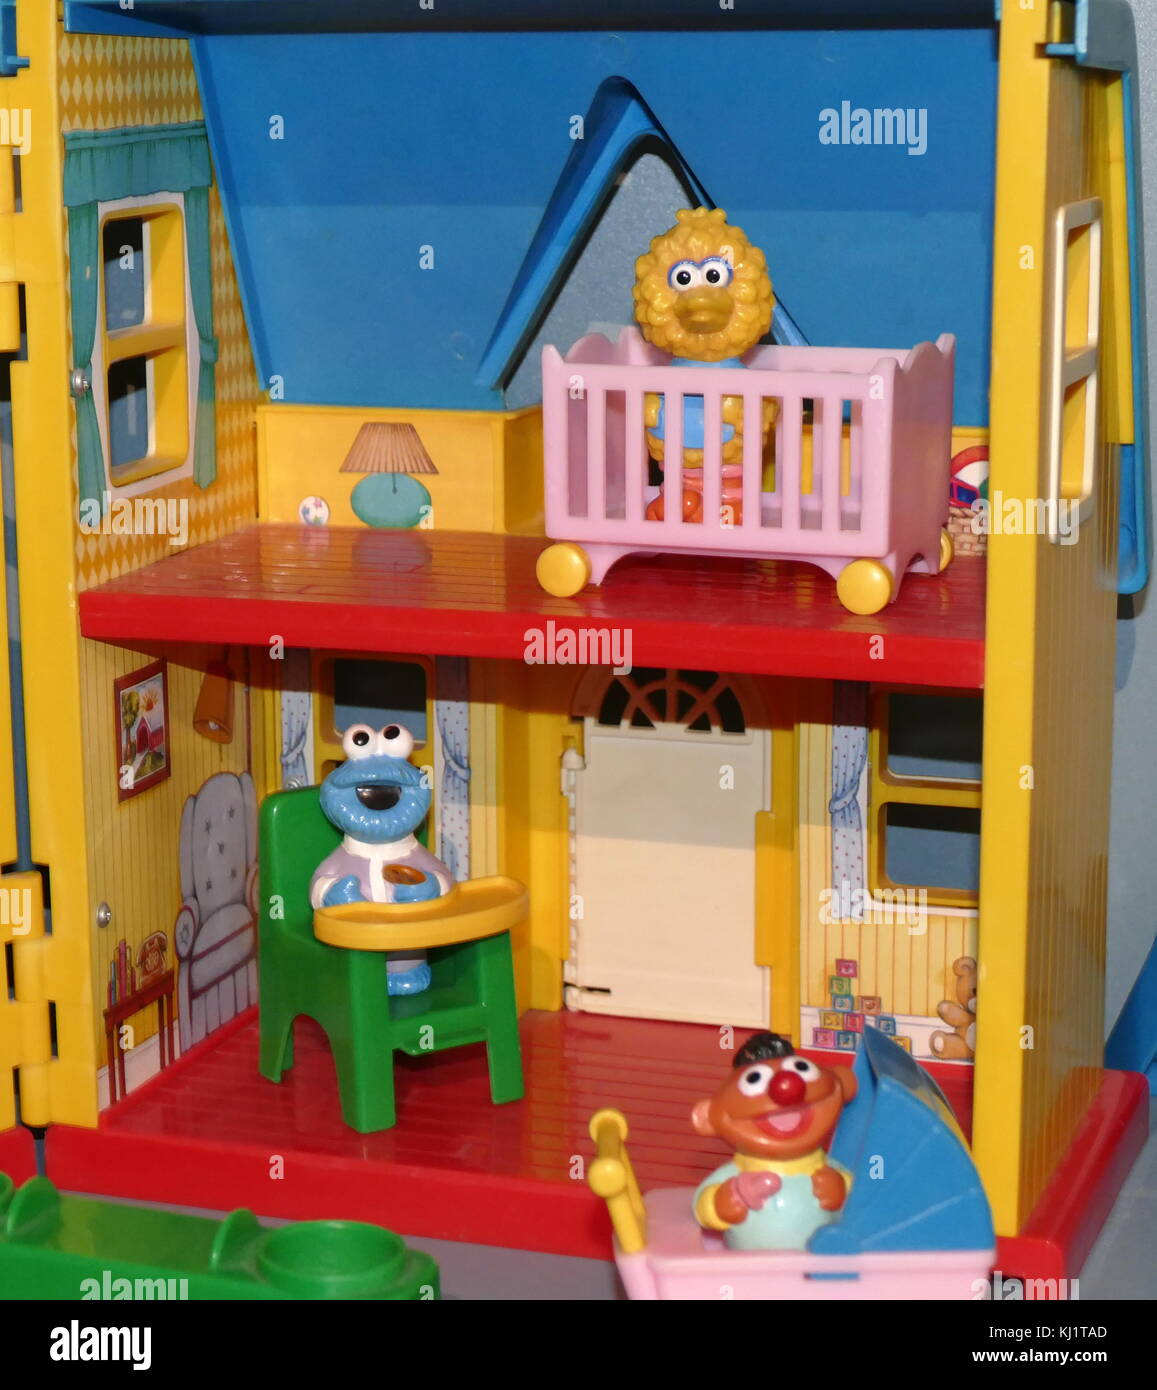 Sesame Street Dolls house made based on the popular children's television programme of the 1980's-1990's. Stock Photo